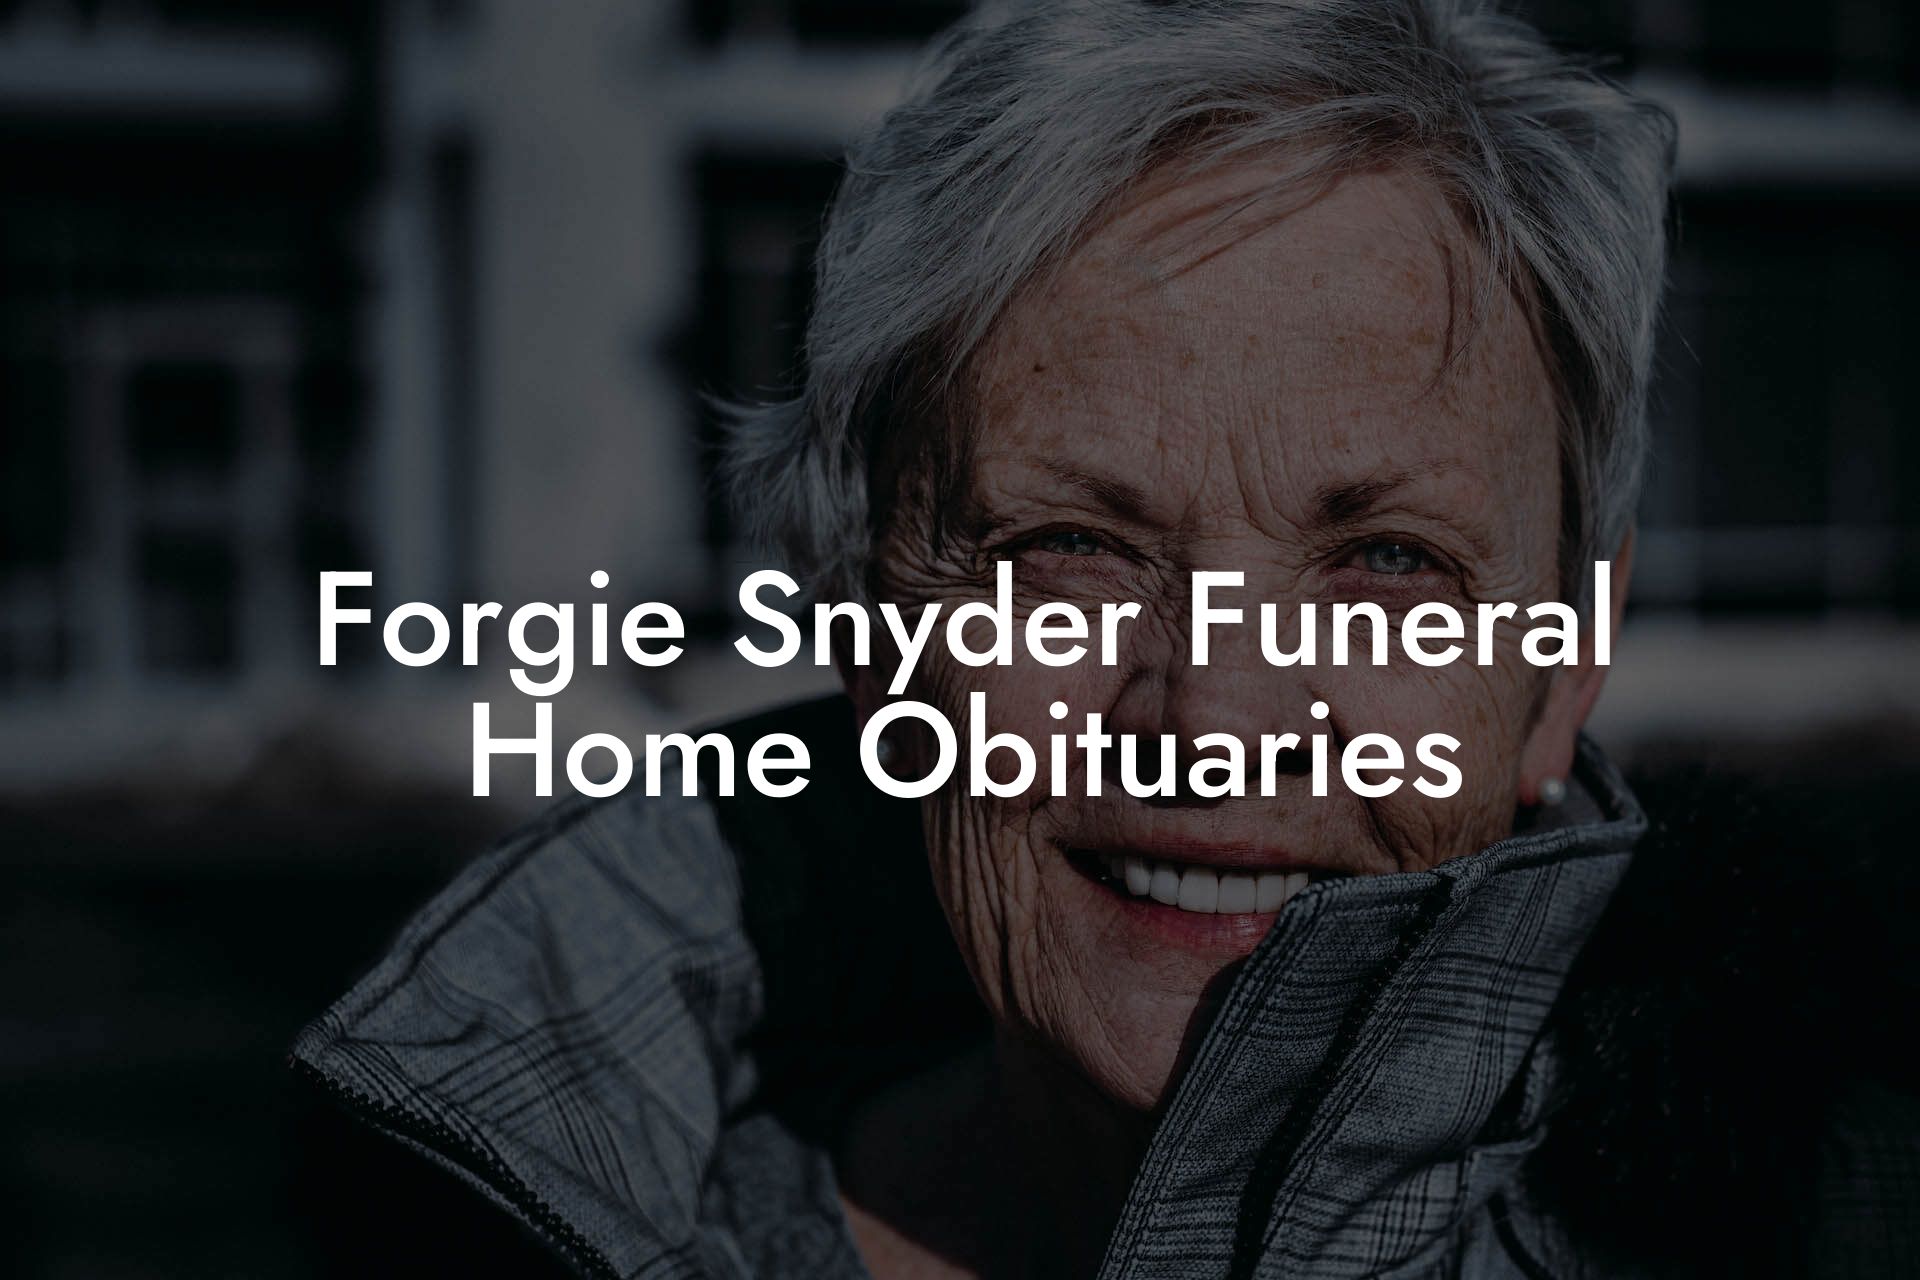 Forgie Snyder Funeral Home Obituaries